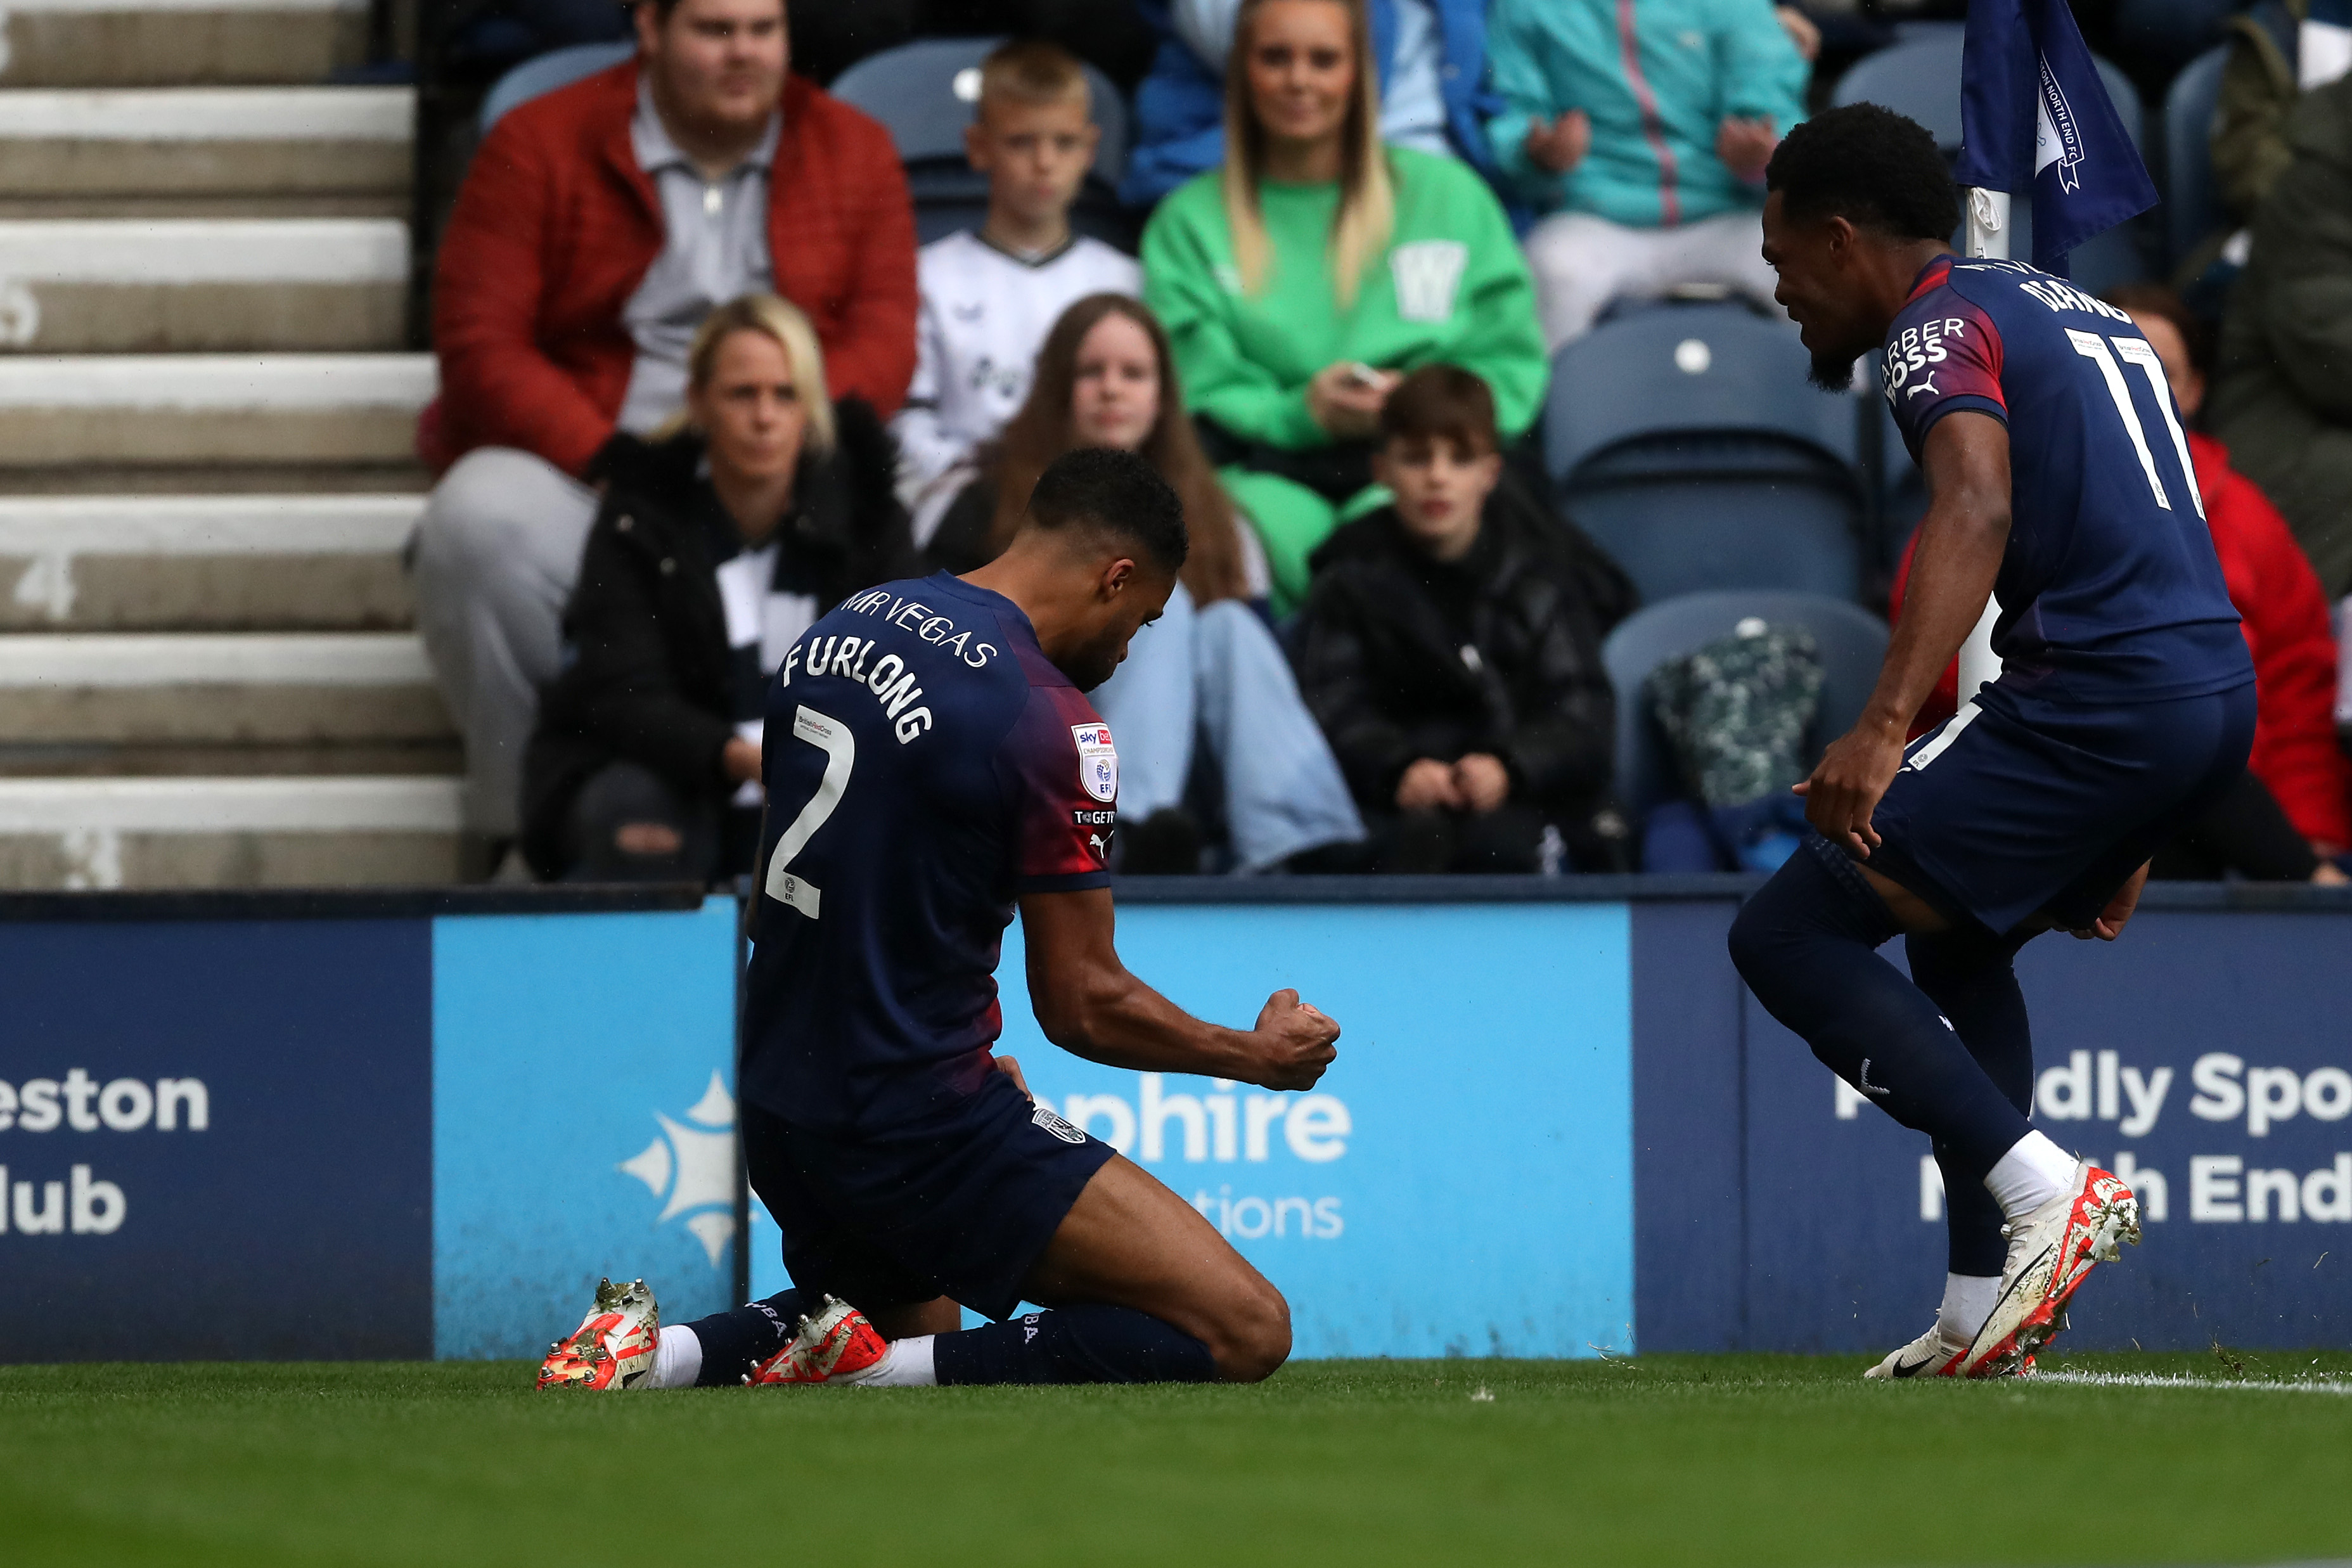 Darnell Furlong celebrates scoring at Preston North End with Grady Diangana while wearing the navy blue and red away kit 